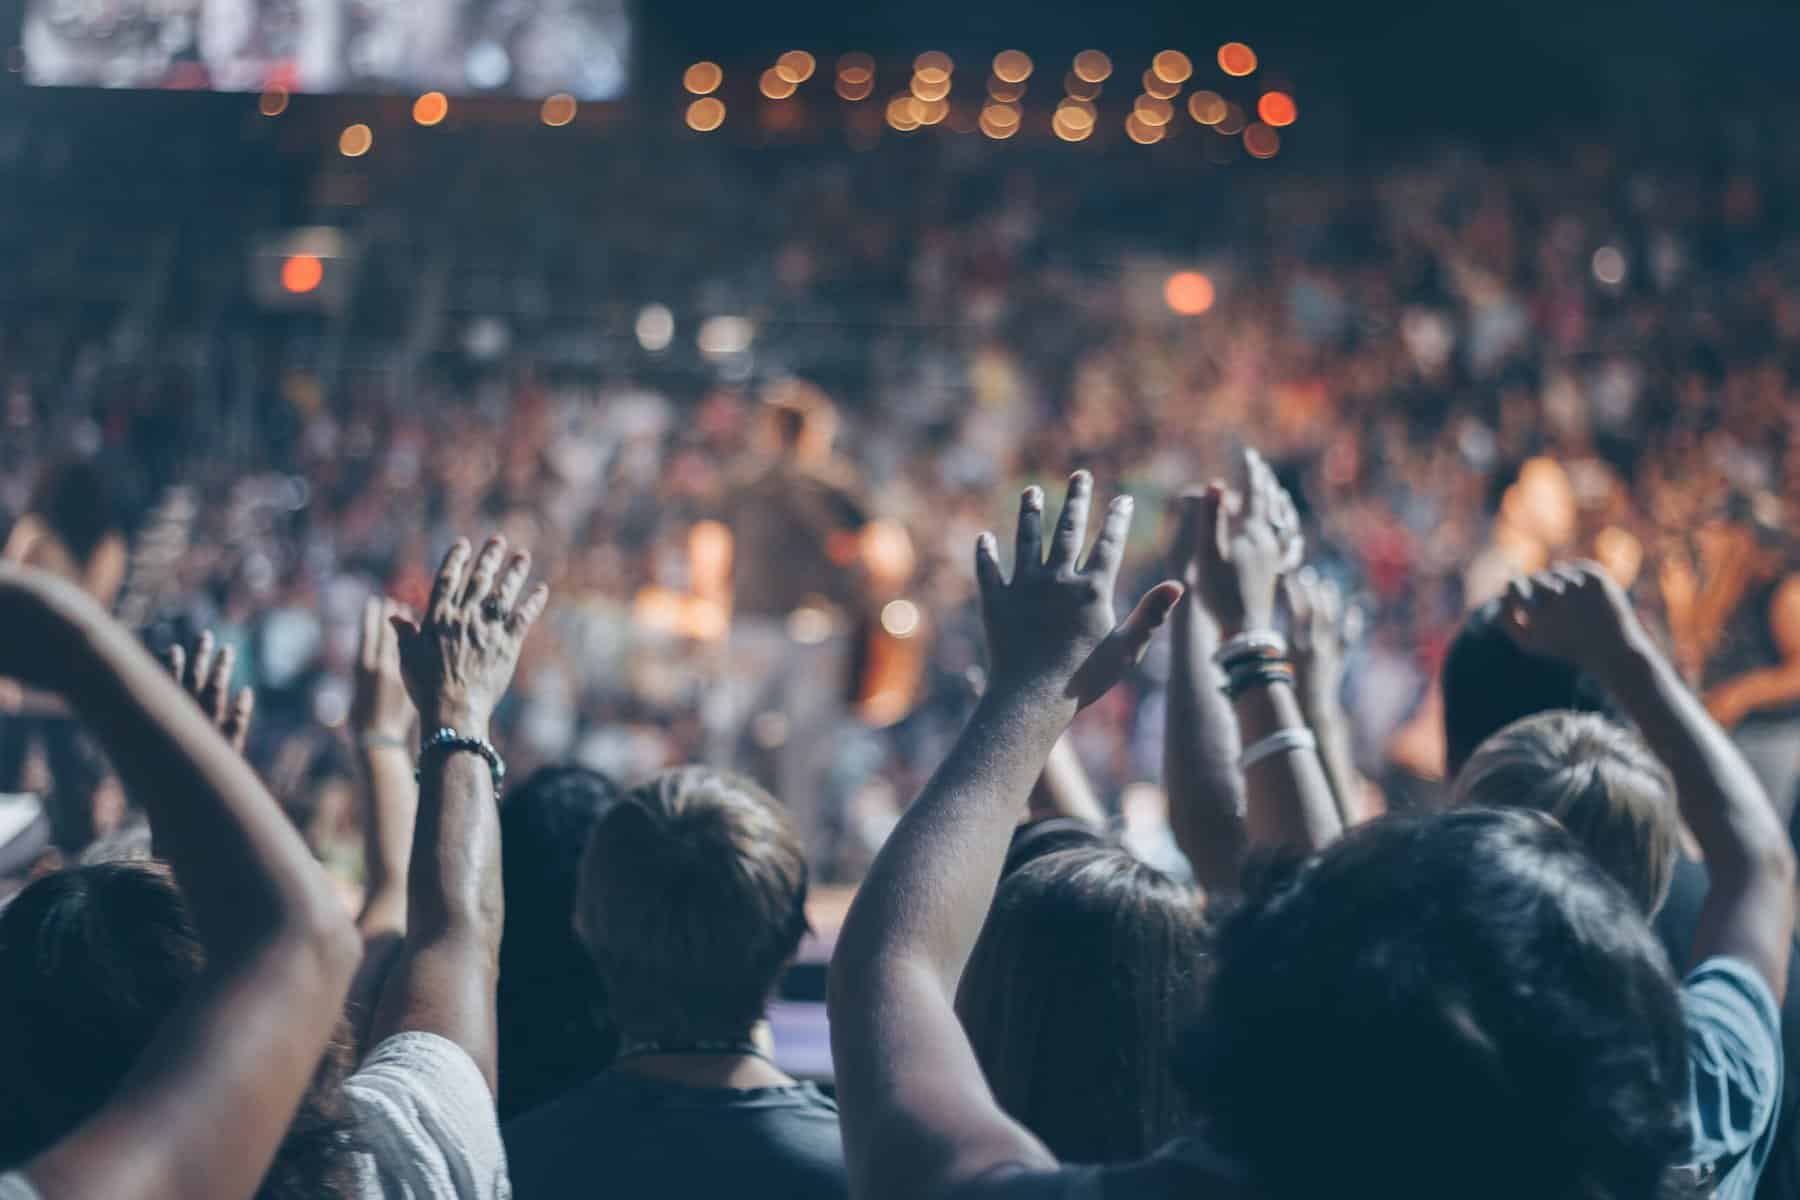 Hands of a crowd are raised in a concert like venue with dramatic lighting.